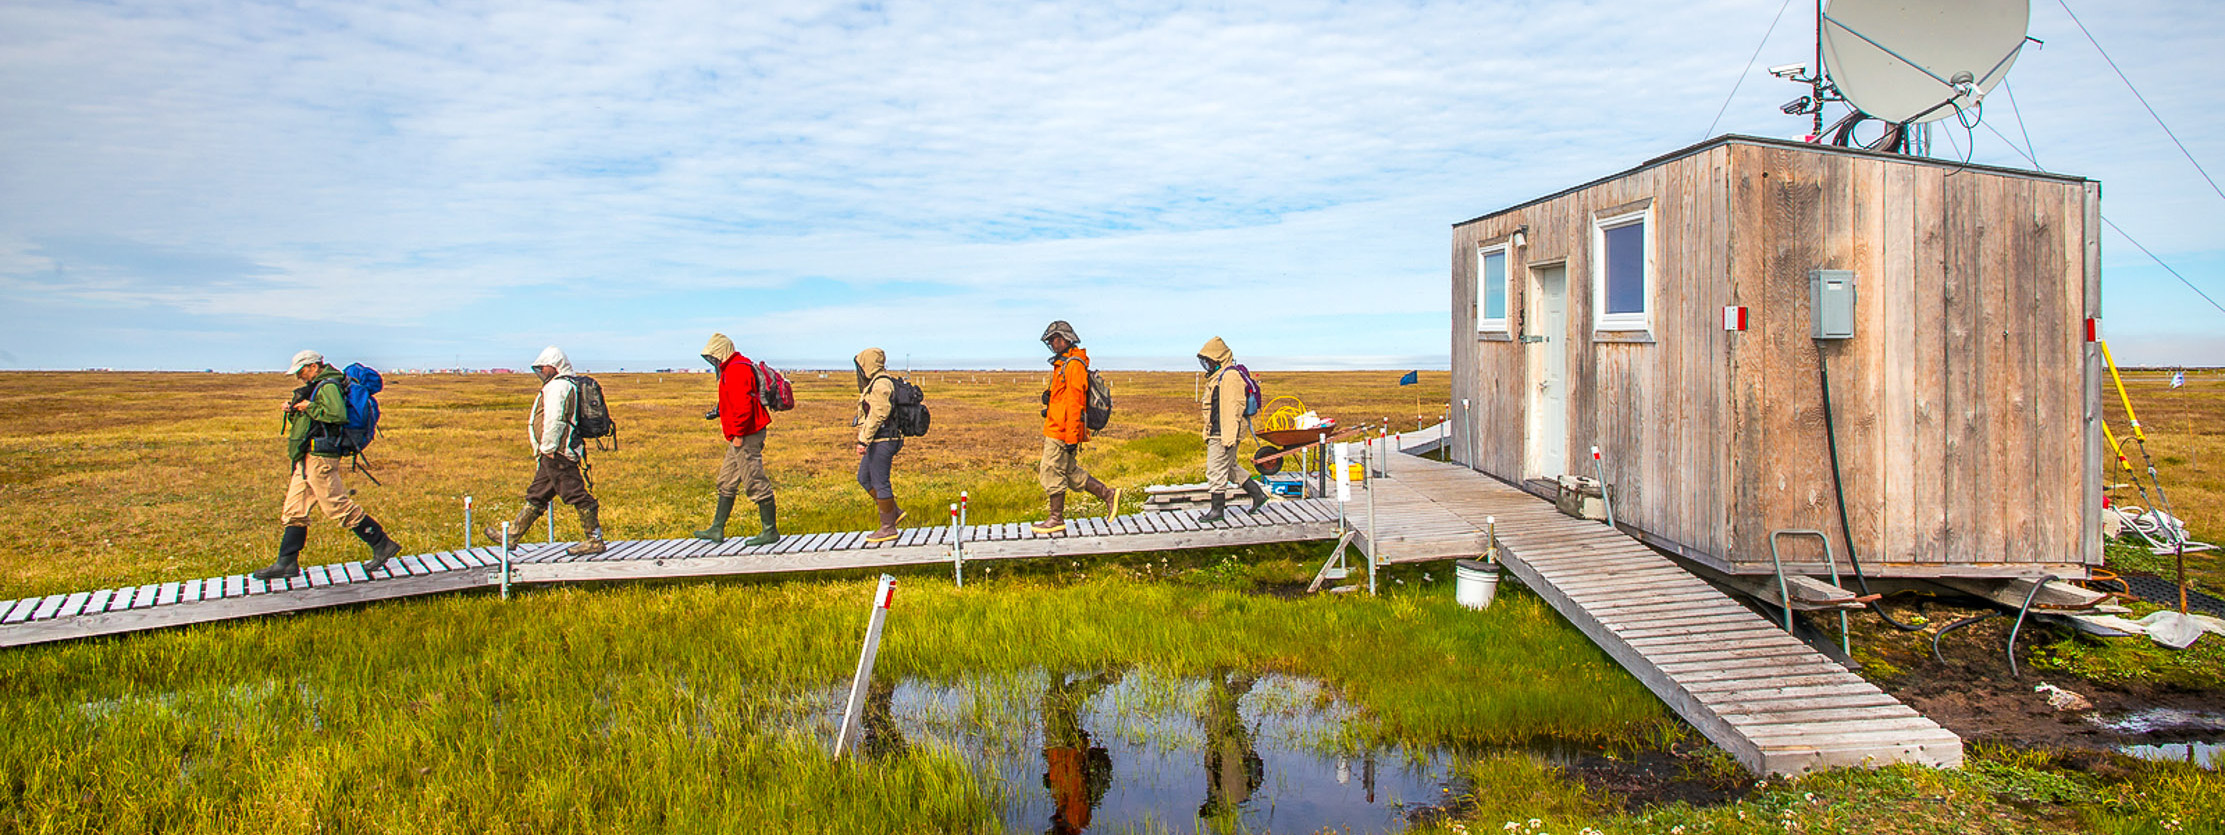 A string of scientists clad in mosquito netting and jackets walk single-file out of a hut on the alaskan tundra